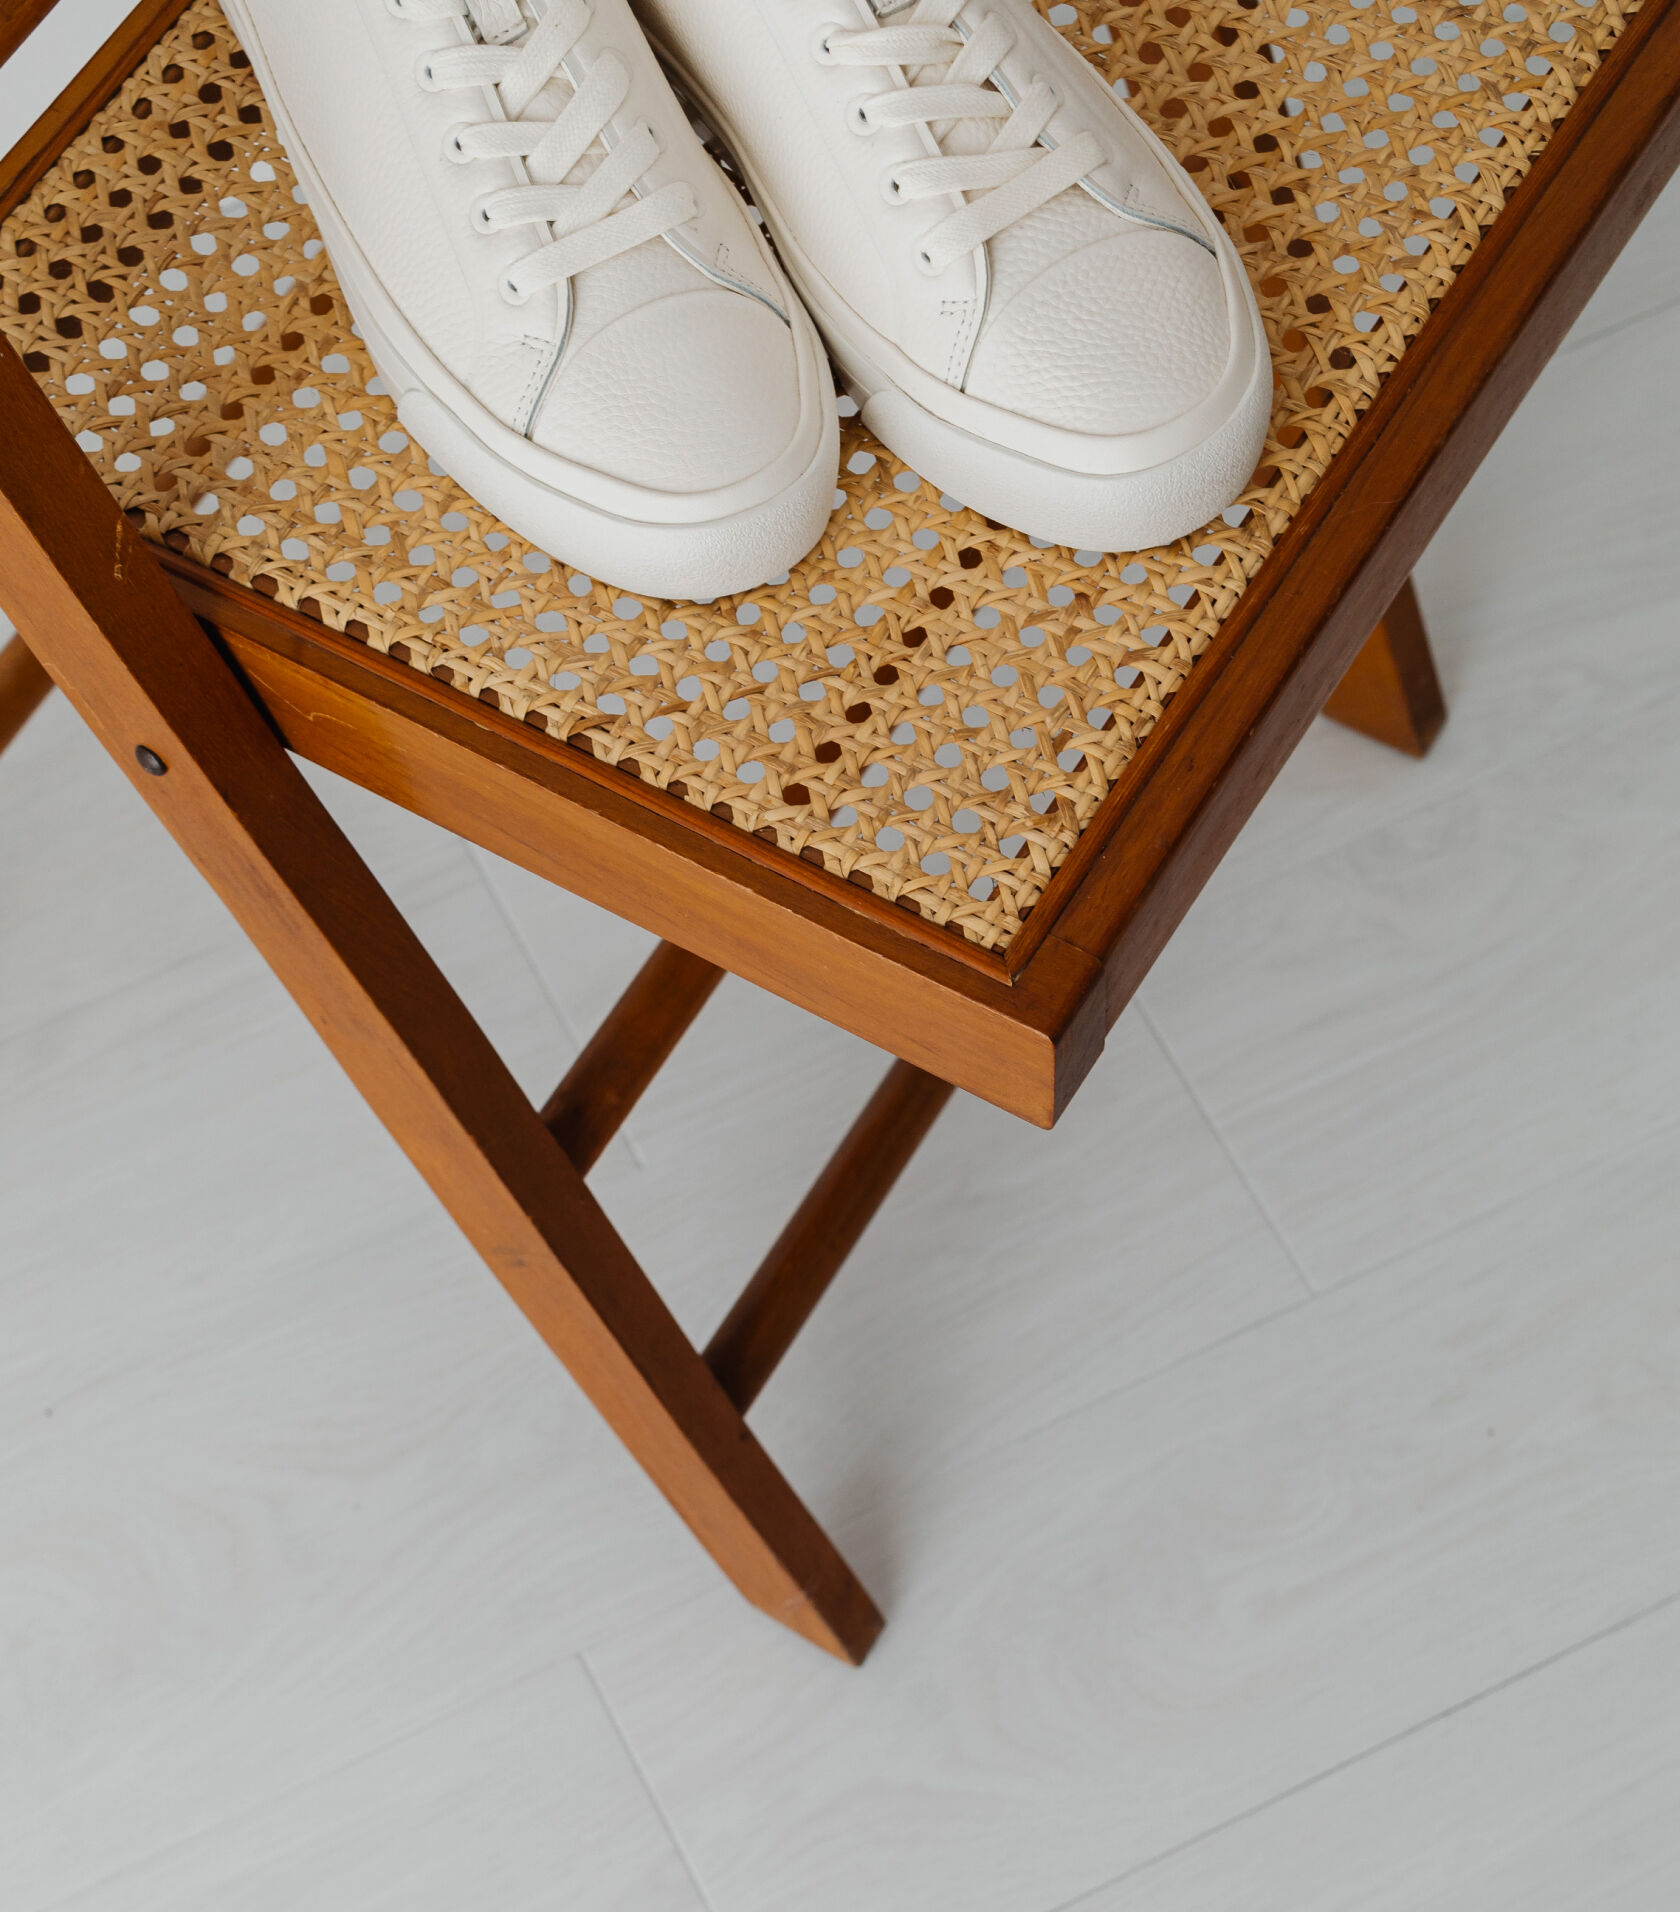 A pair of white sneakers on a chair.